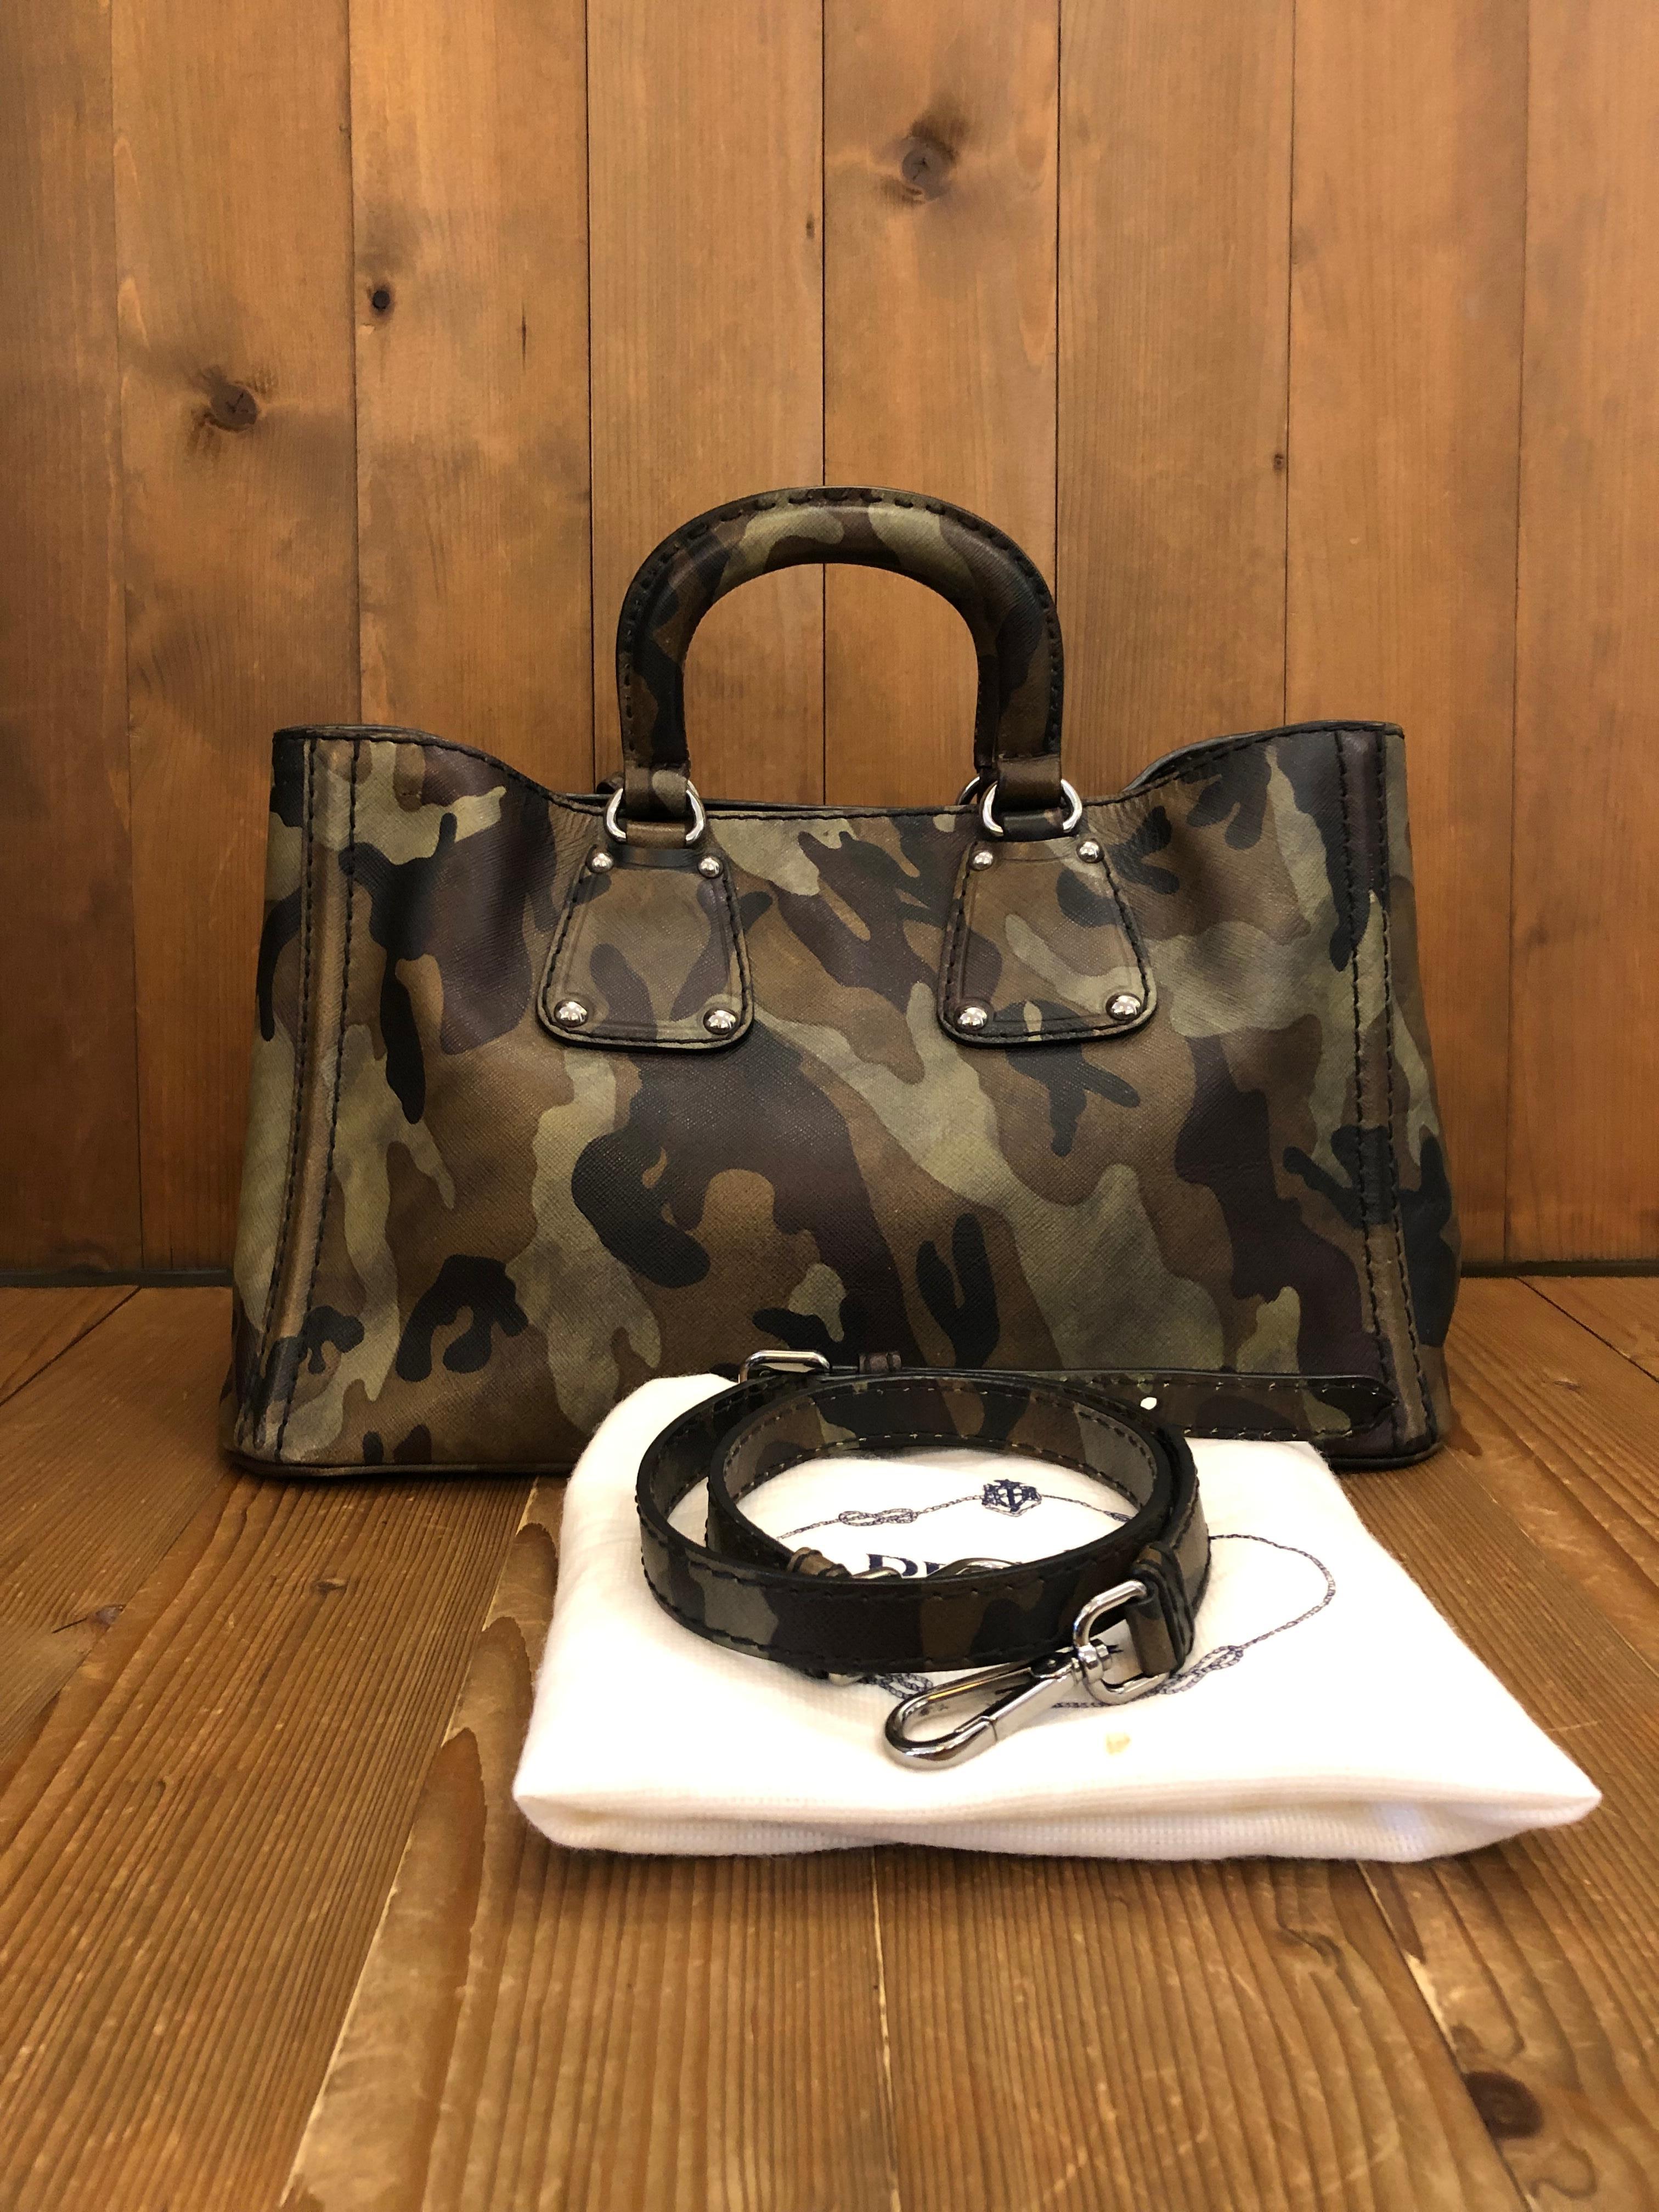 2000s Prada two-way tote in green camouflage Saffiano leather featuring shiny silver-toned hardware and sturdy handles along with detachable shoulder strap. Made in Italy. Measures approximately 15 x 9 x 8 inches handle drop 17 inches at its